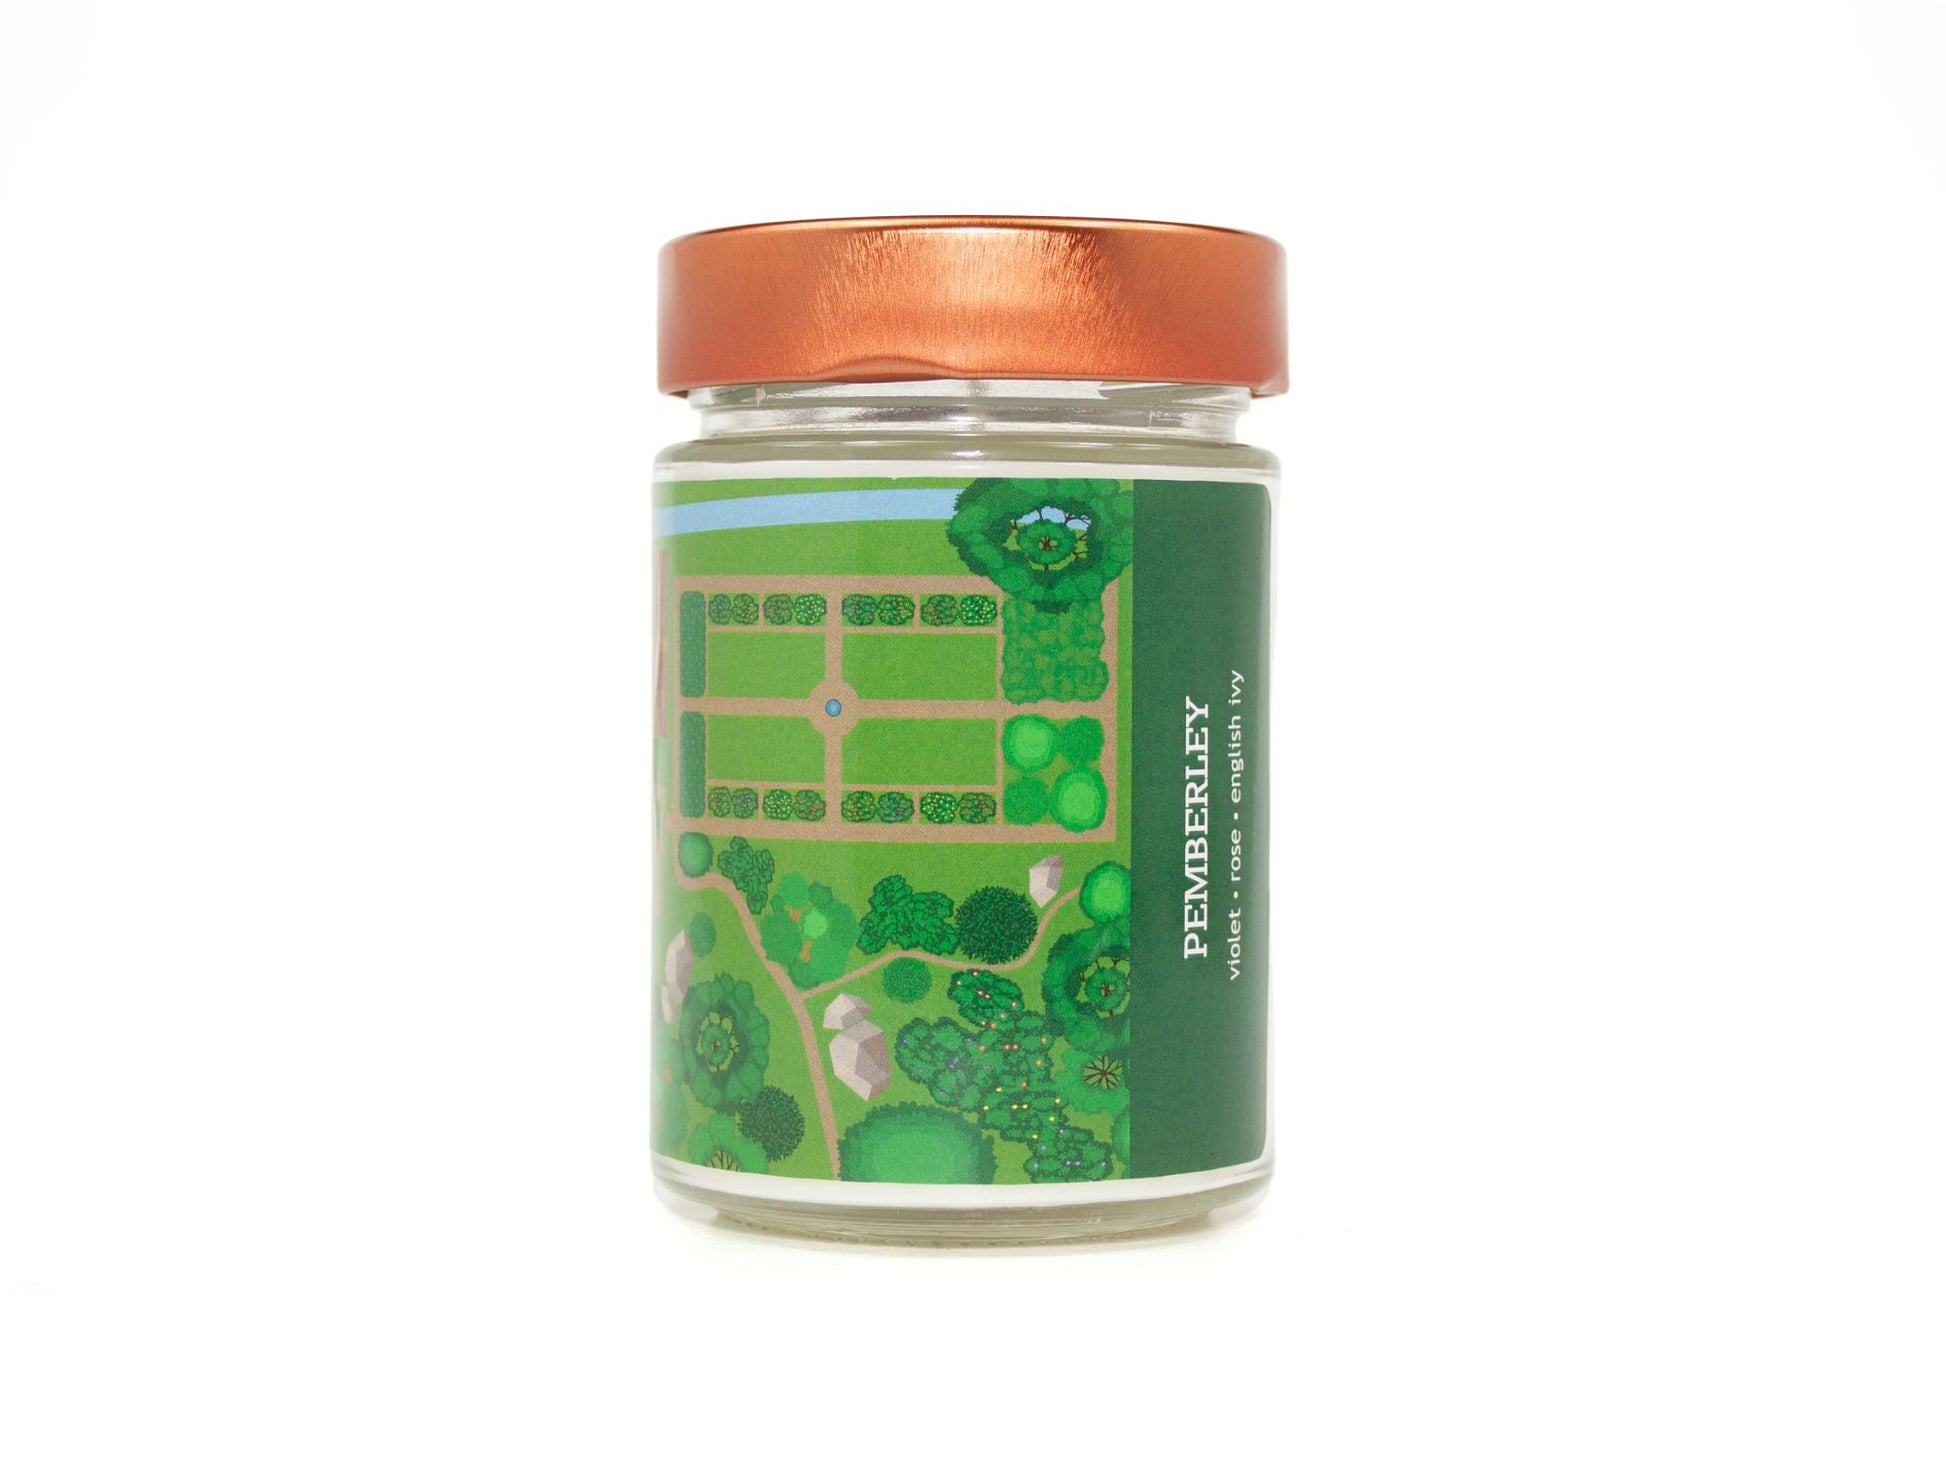 Onset & Rime English garden scented candle called "Pemberley" in a 10 oz glass jar with copper lid. The label depicts a top-down view of Pemberley estates showing the garden and river. The text on the label is "Pemberley - Violet, Rose, English Ivy".